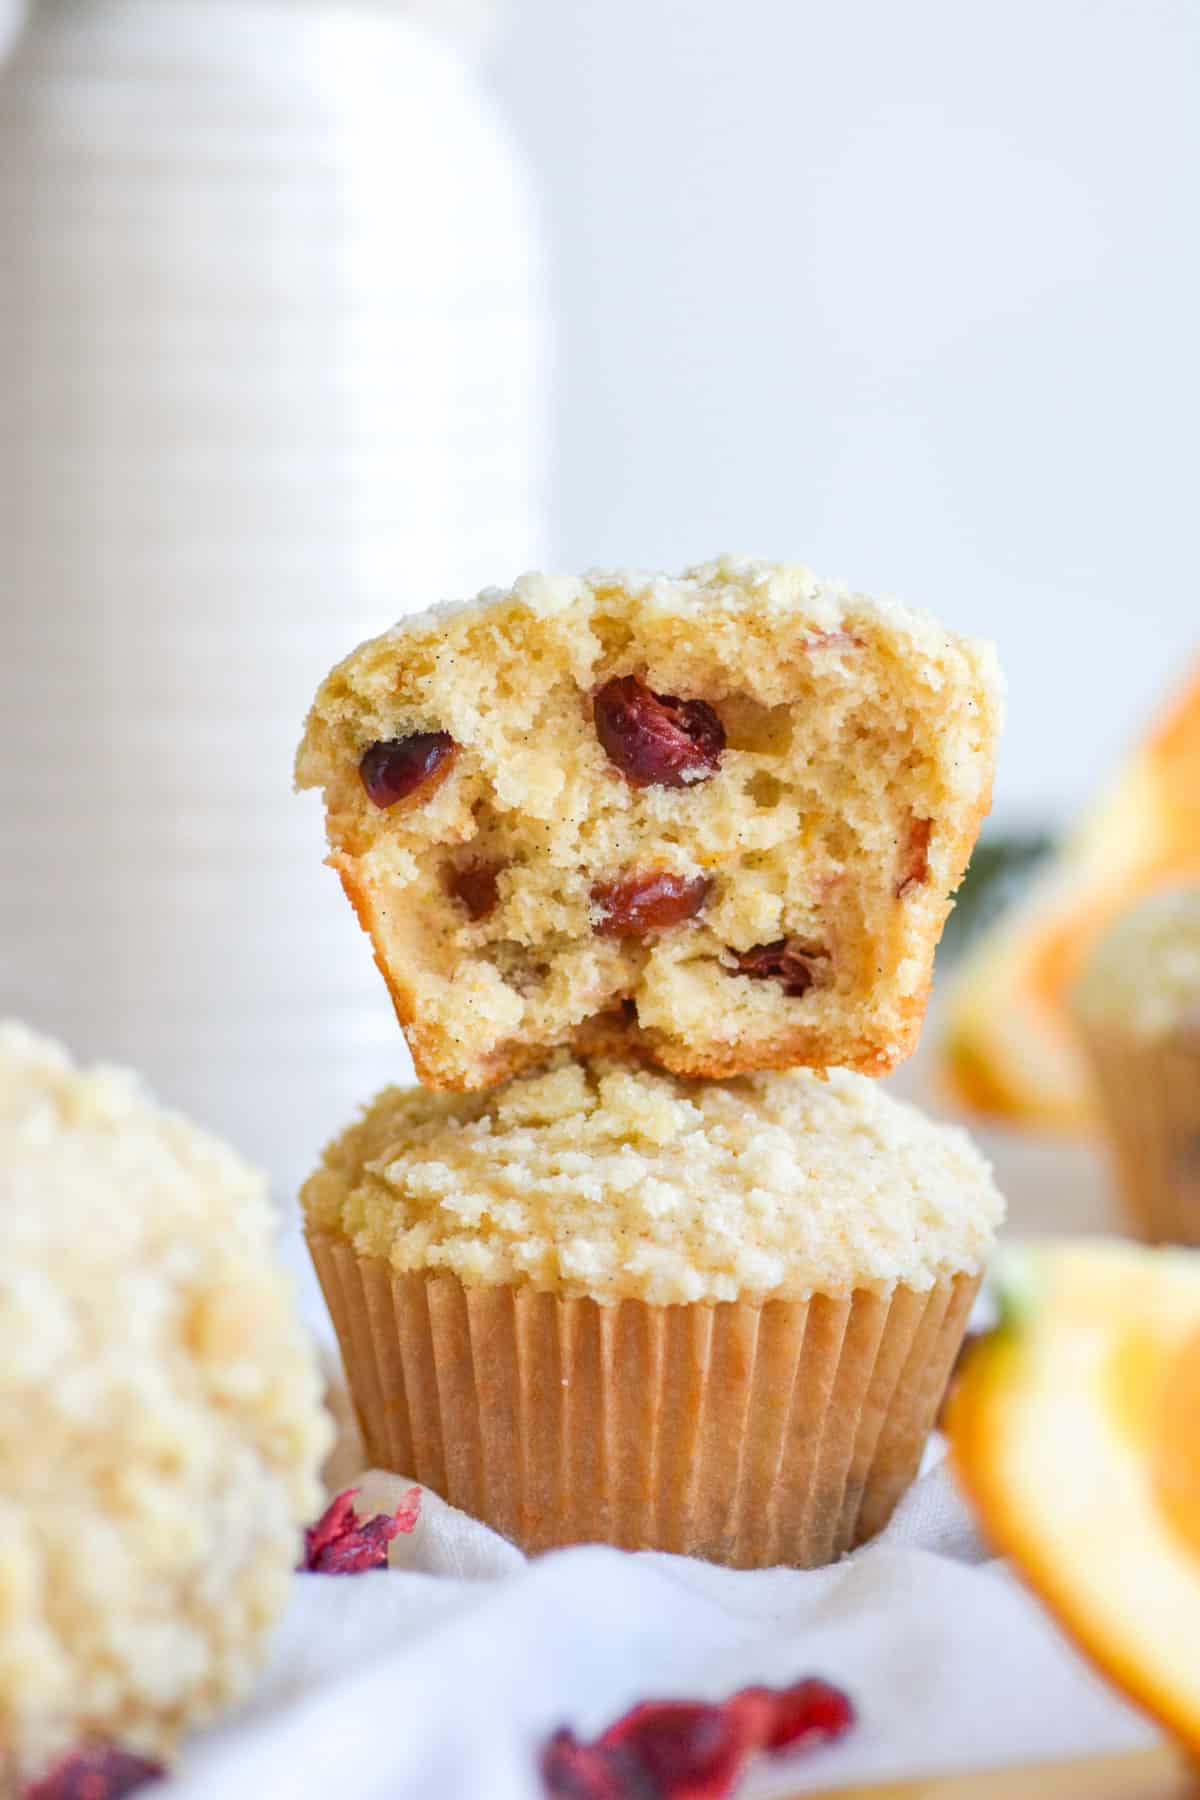 A muffin that is broken in half sitting on top of another Vegan Cranberry Orange Muffin.